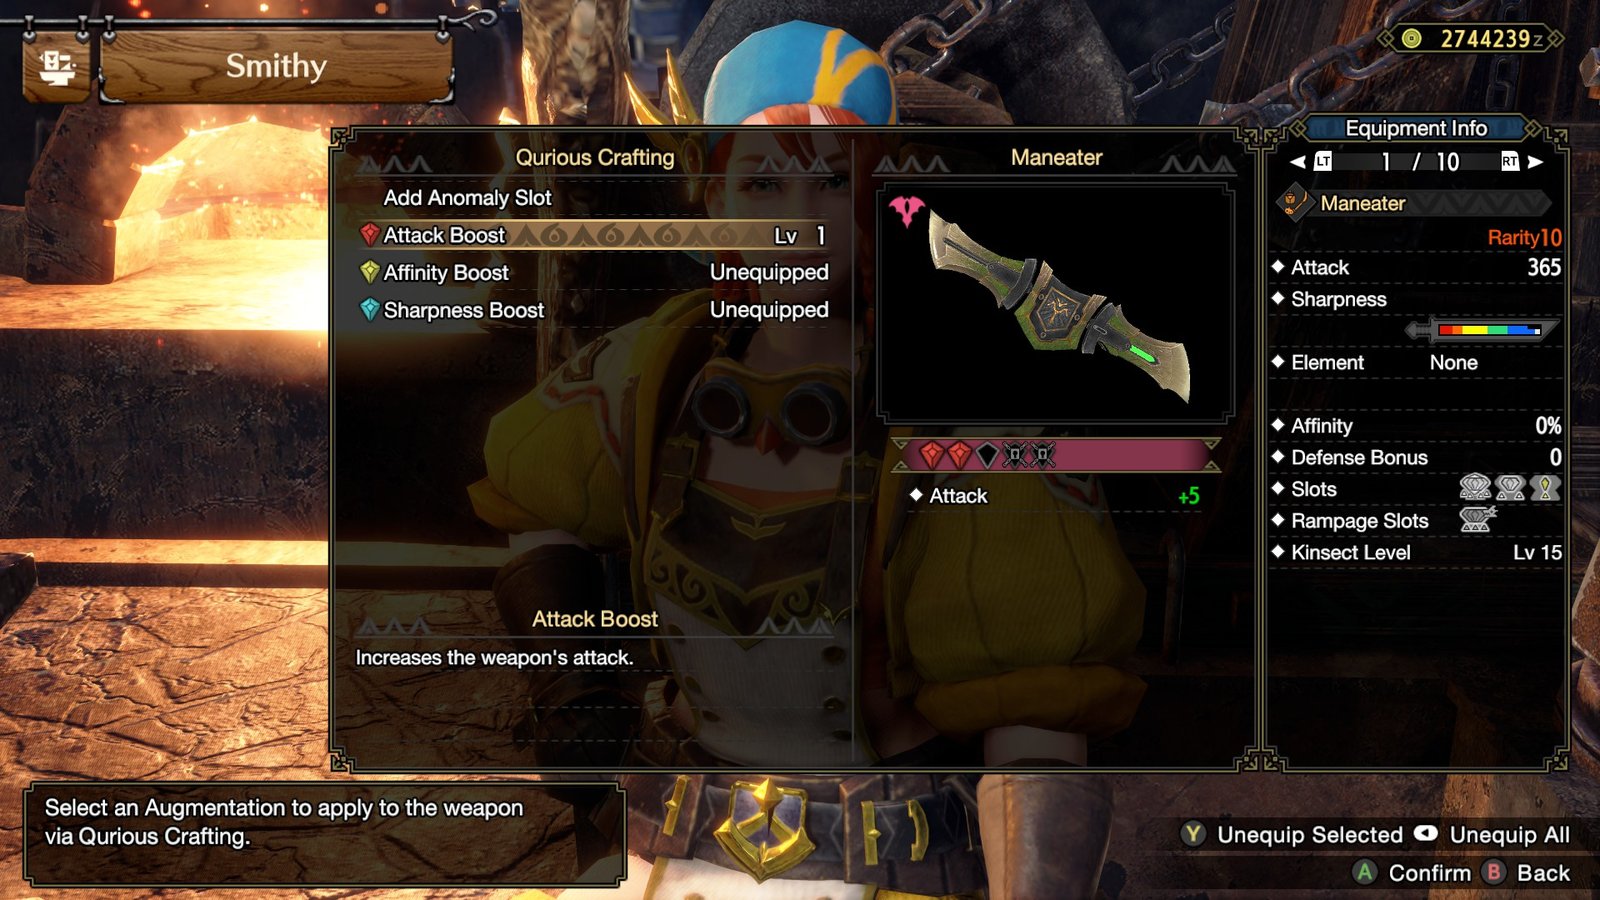 Qurious Crafting screen for weapons